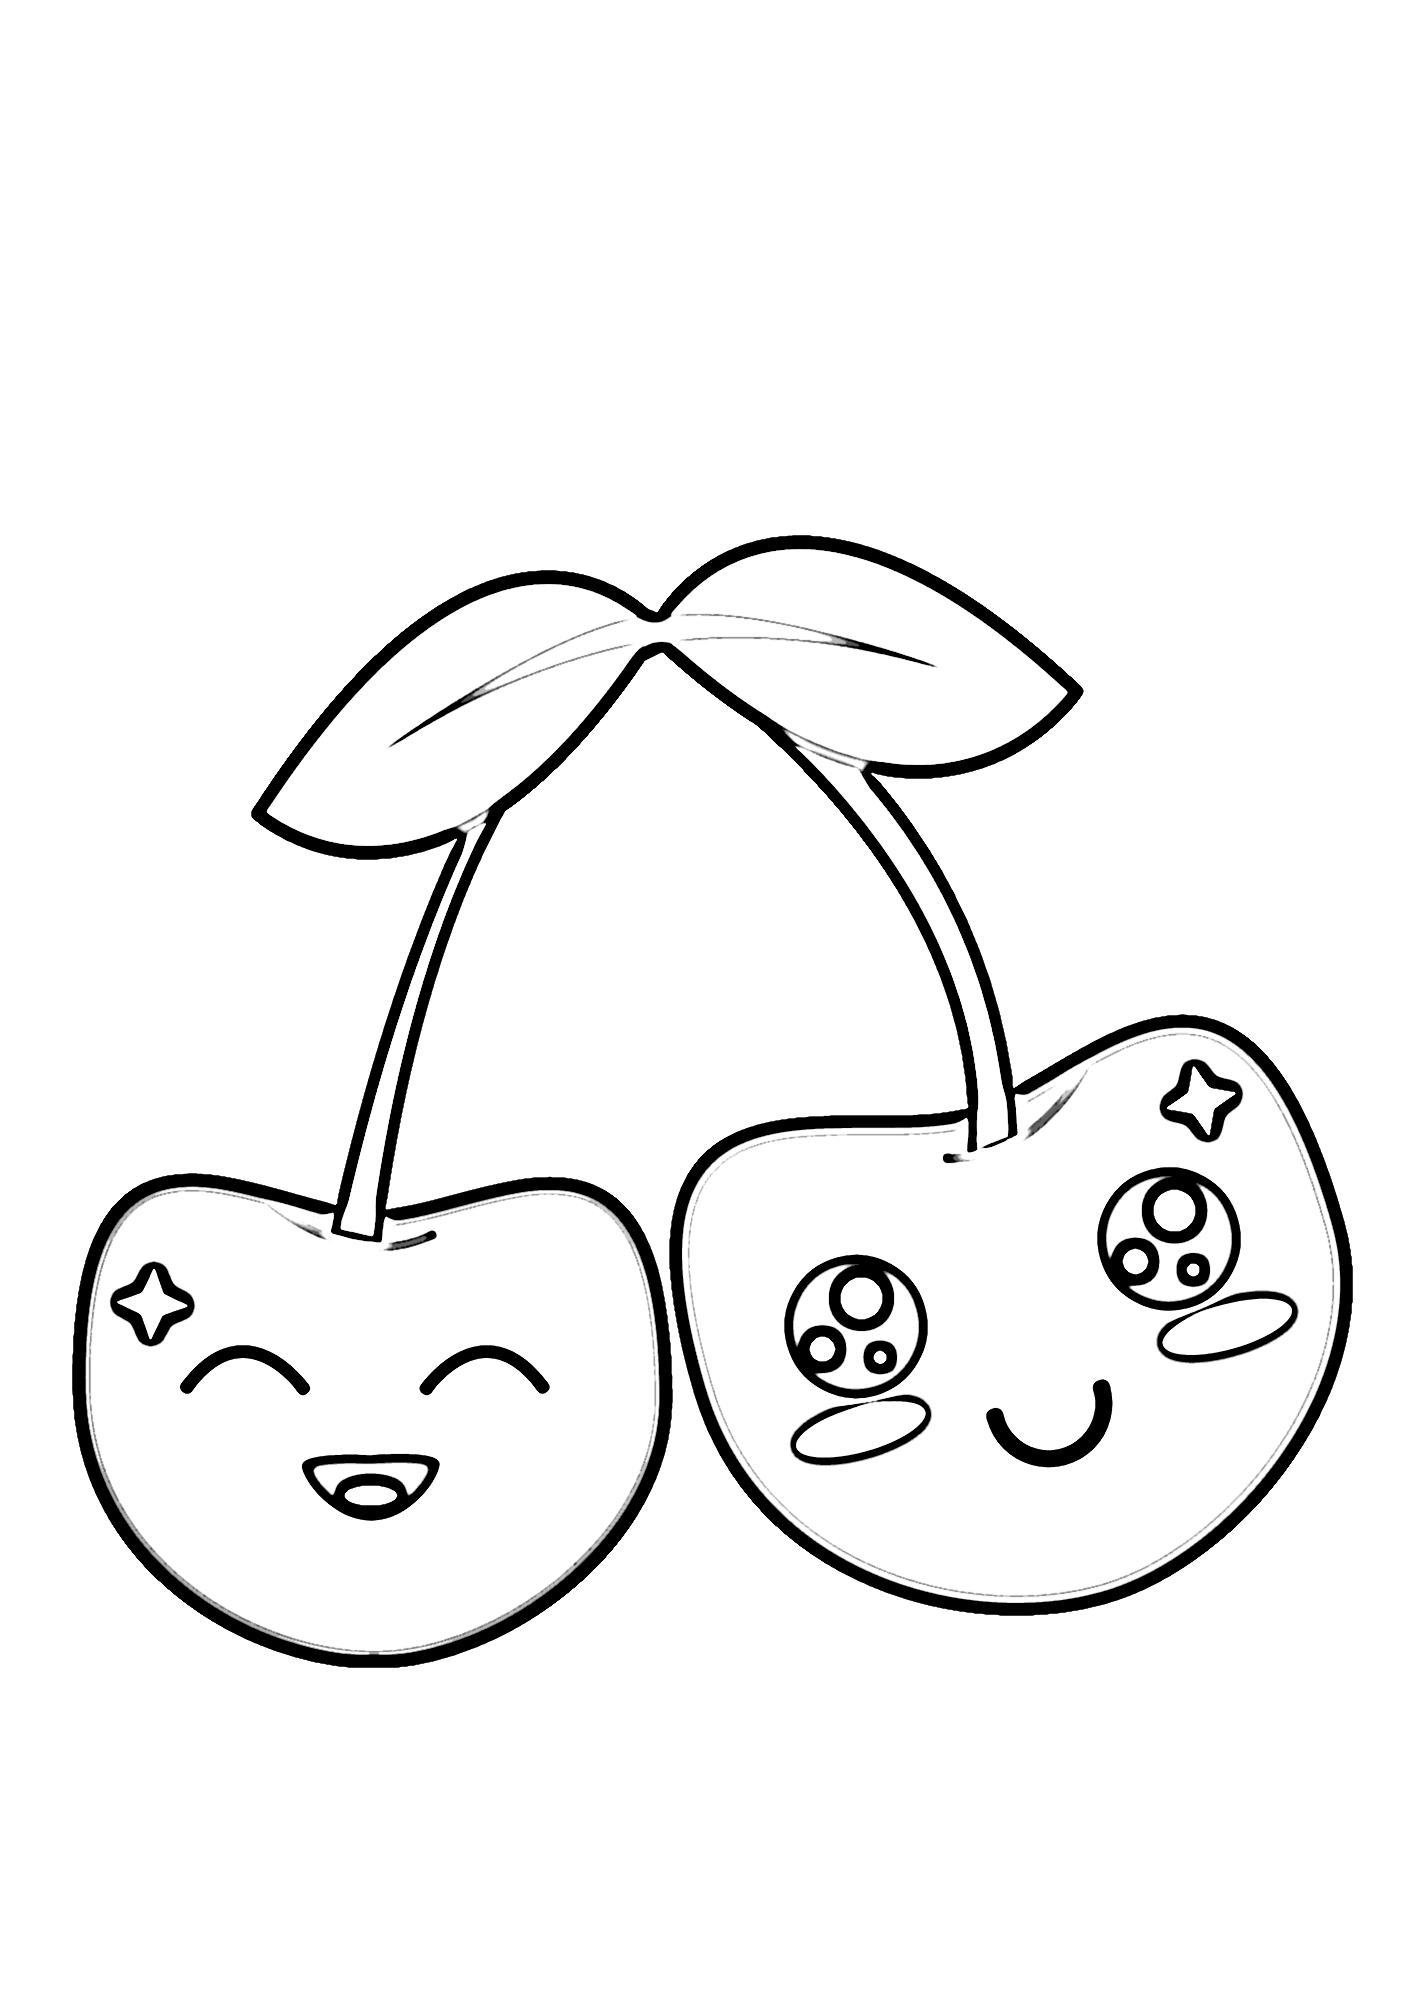 Cute Cherry Coloring Page